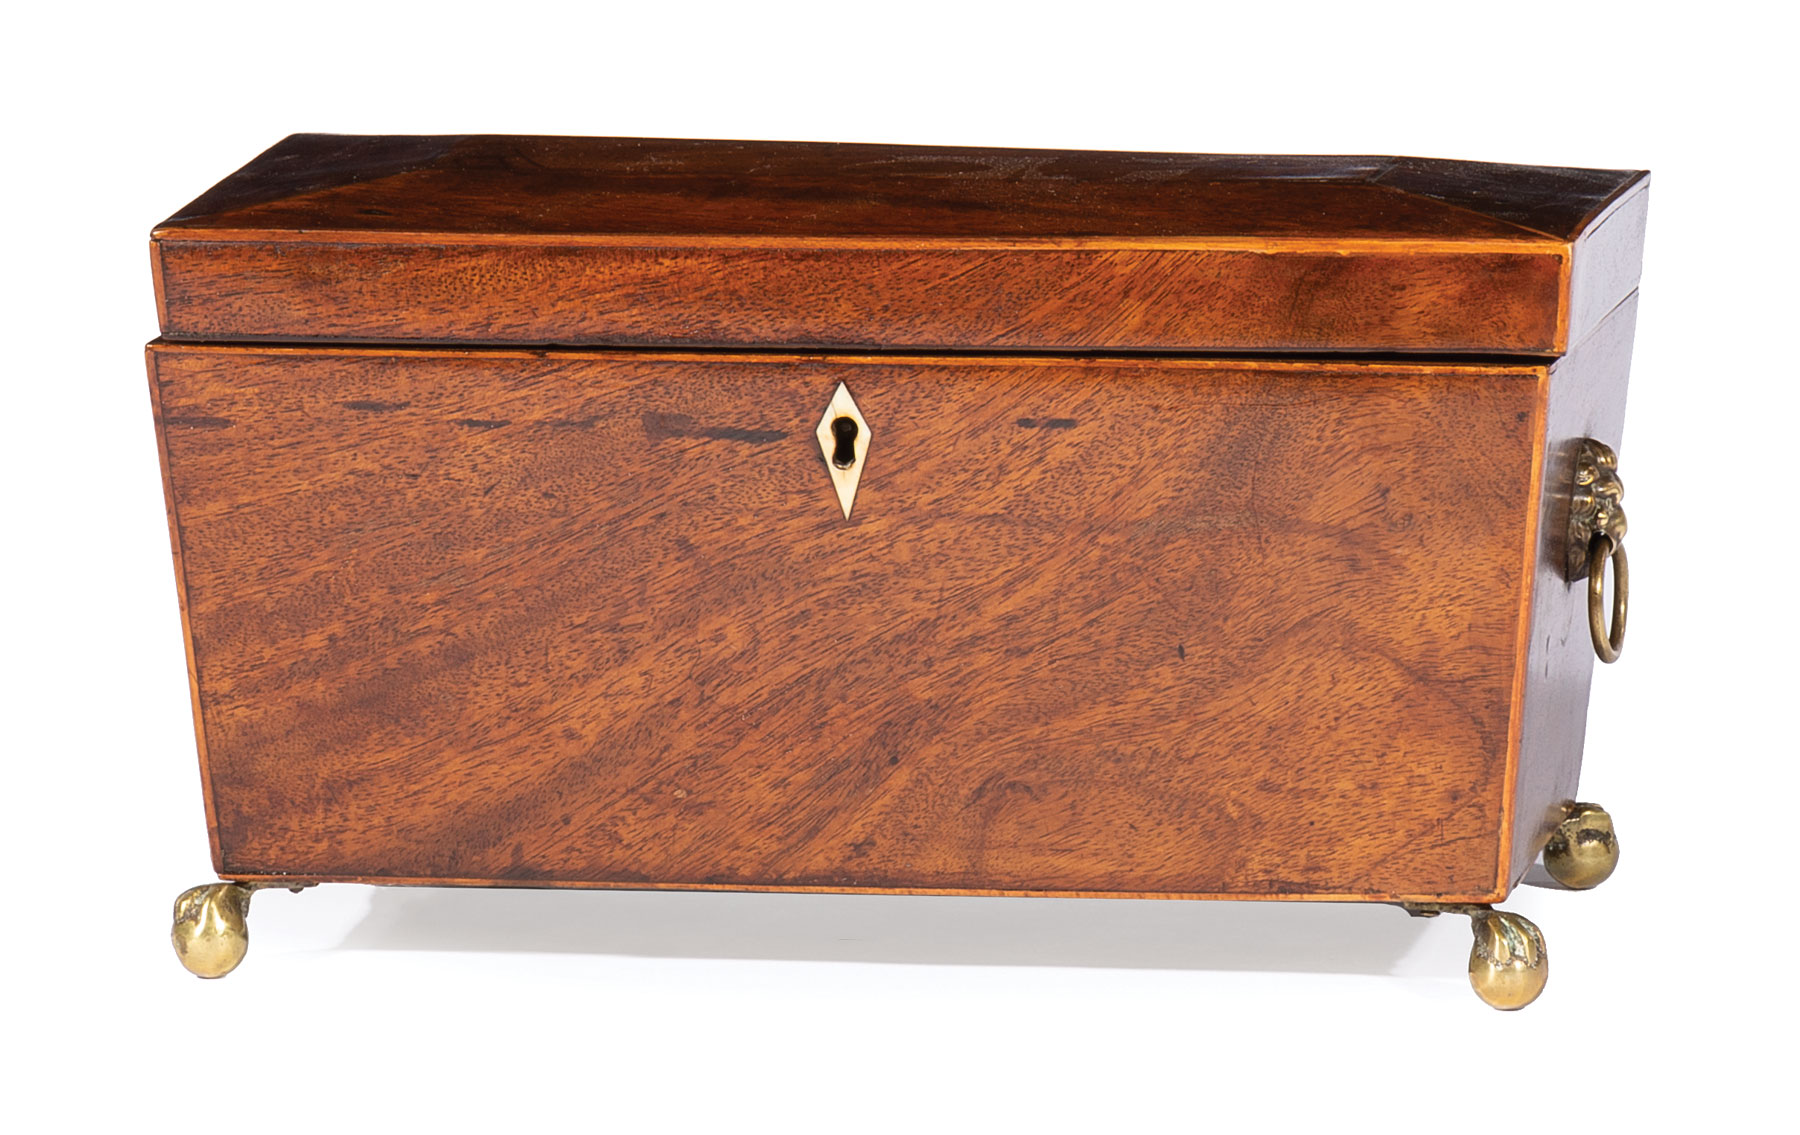 George III Mahogany Tea Caddy , c. 1790, rectangular form, interior with two lidded compartments,